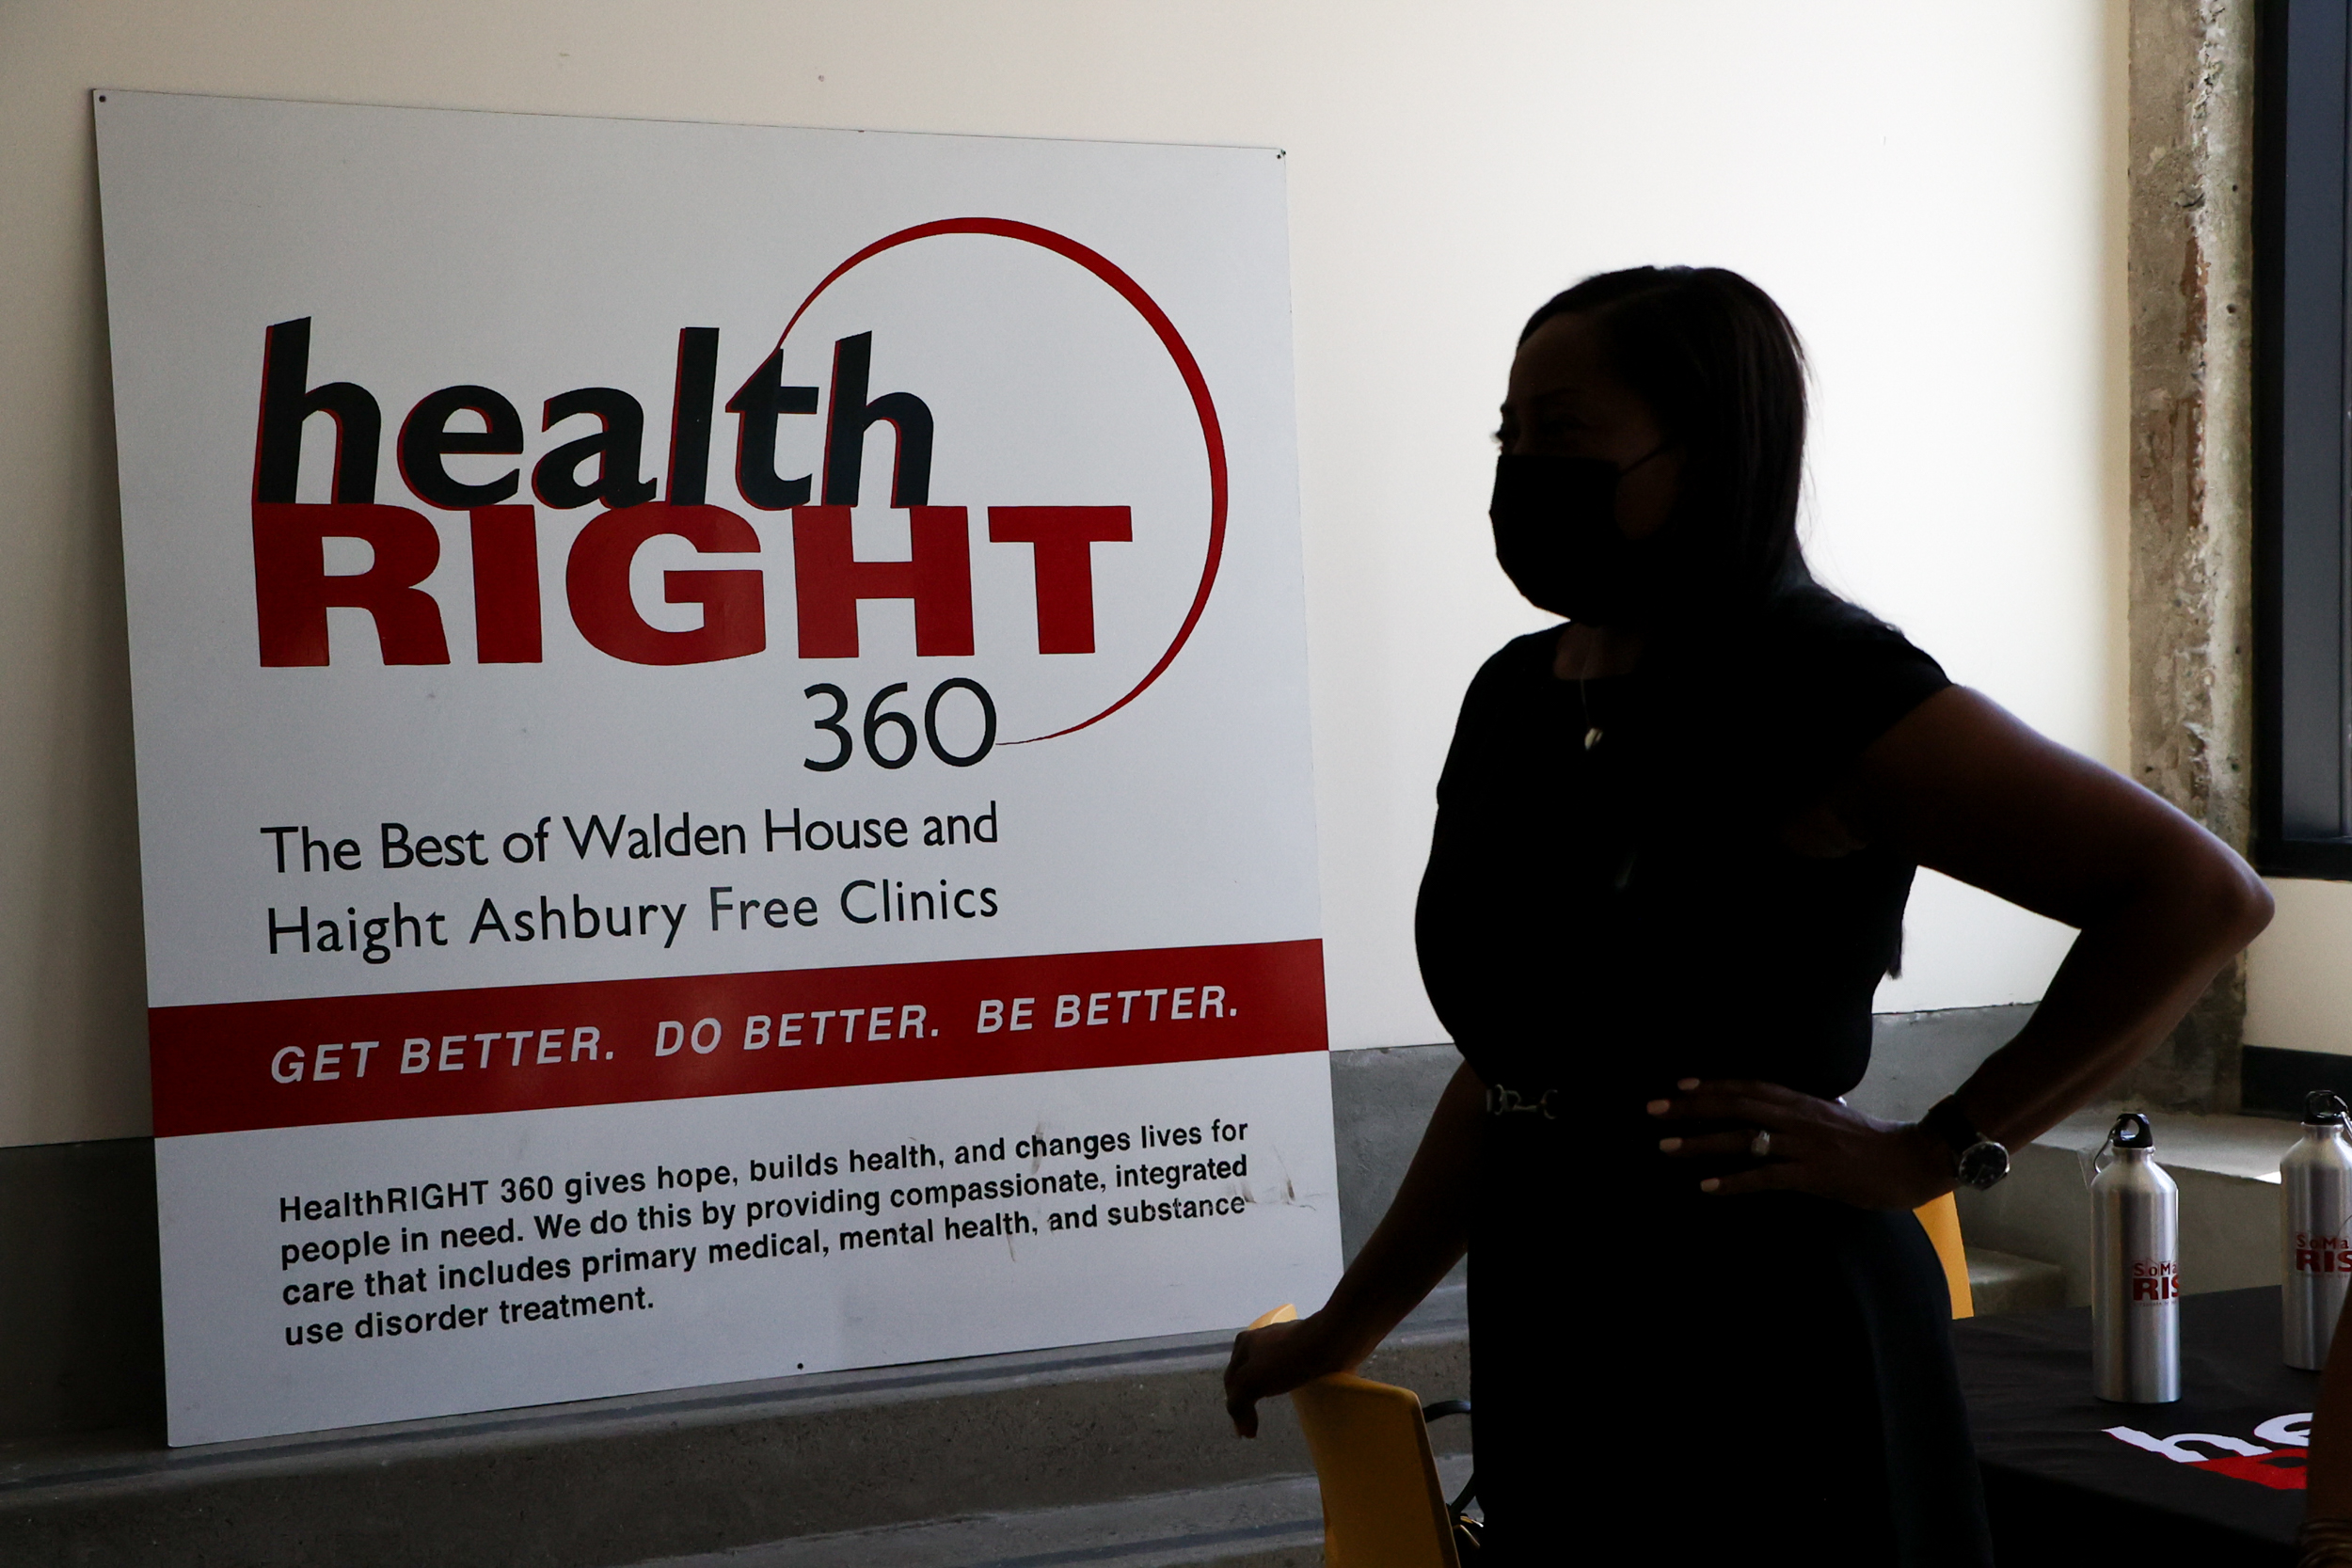 A silhouette of a masked person stands beside a HealthRIGHT 360 sign with motivational slogans.